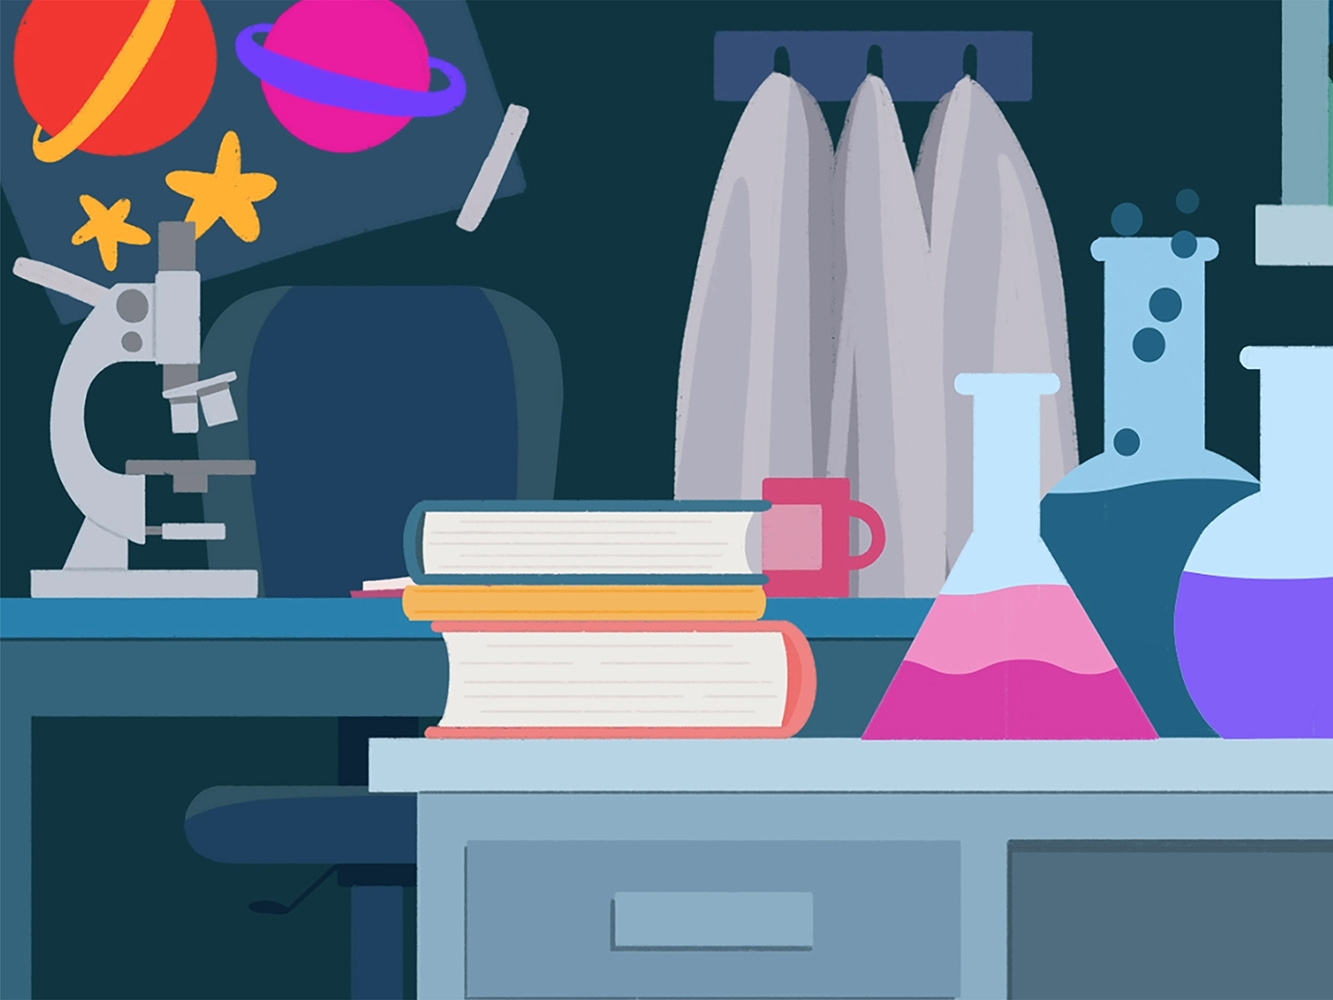 Graphic design of science lab with books, telescope and glass jars set on a table, lab coats hanging on a coat hanger and a poster of space on the wall